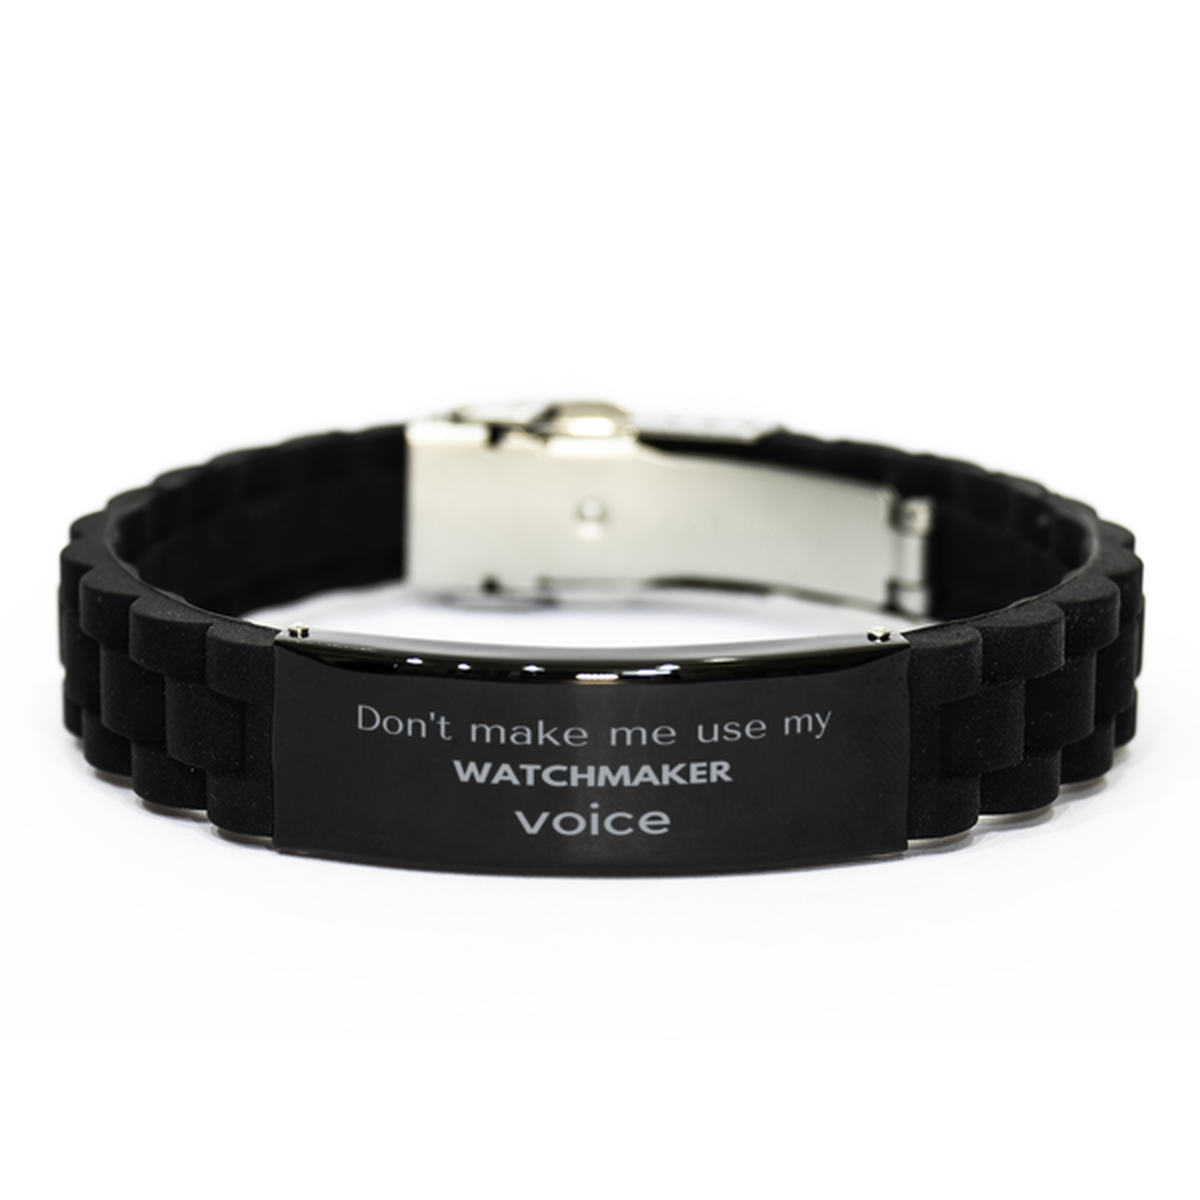 Don't make me use my Watchmaker voice, Sarcasm Watchmaker Gifts, Christmas Watchmaker Black Glidelock Clasp Bracelet Birthday Unique Gifts For Watchmaker Coworkers, Men, Women, Colleague, Friends